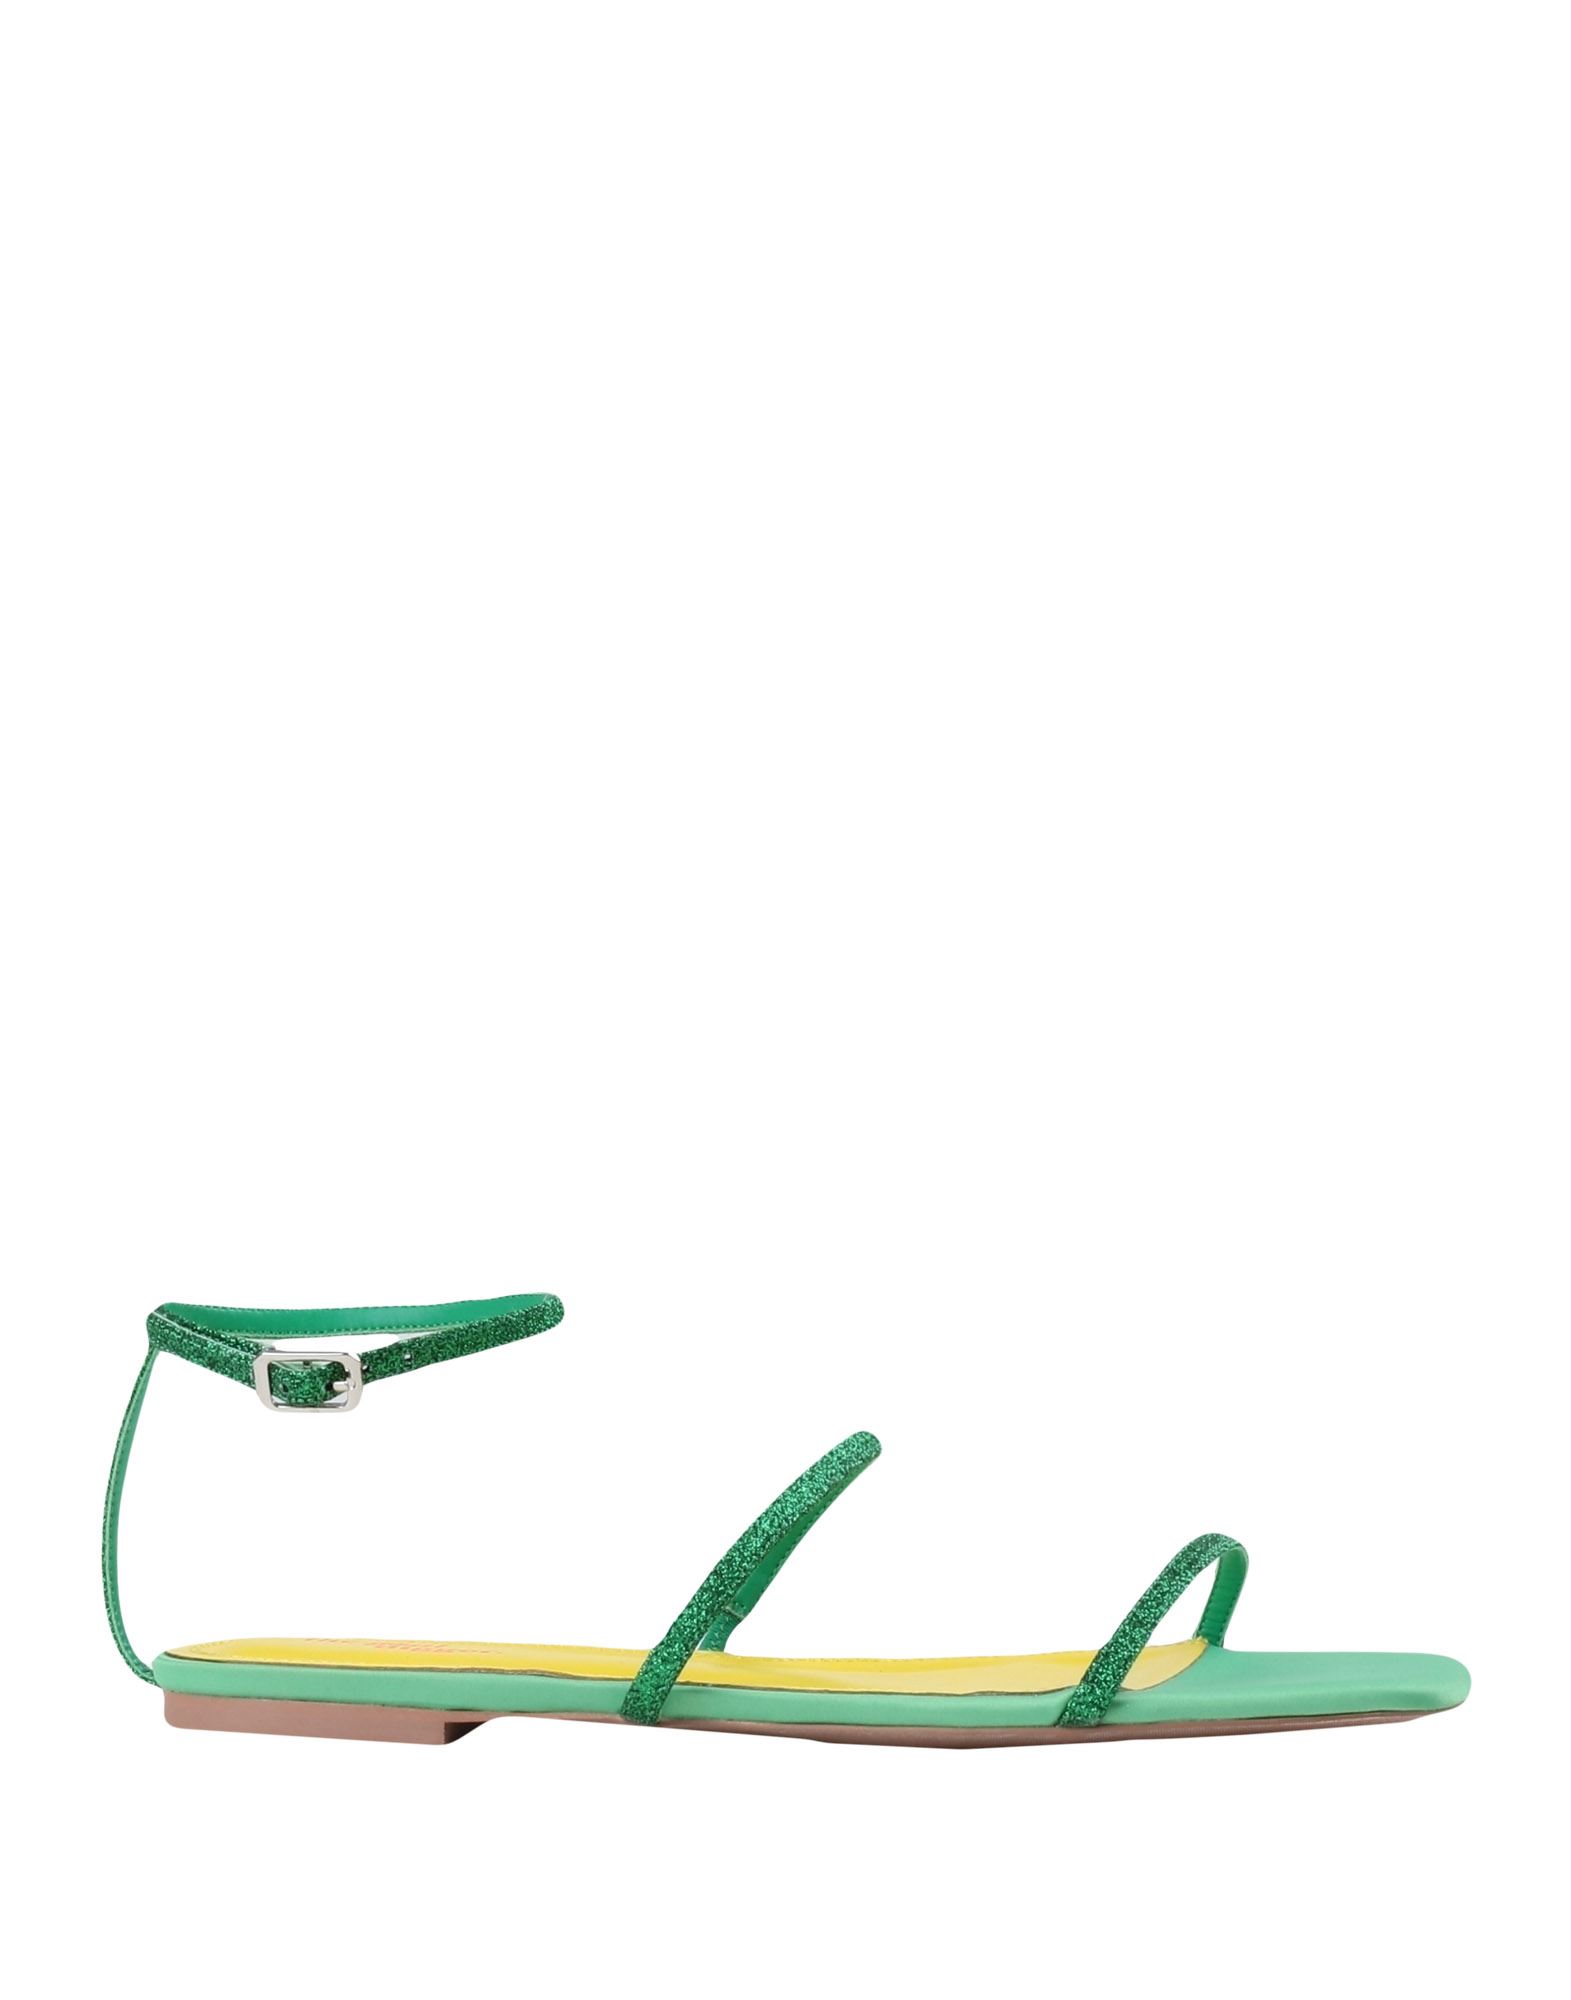 The Goal Digger Sandals In Green | ModeSens